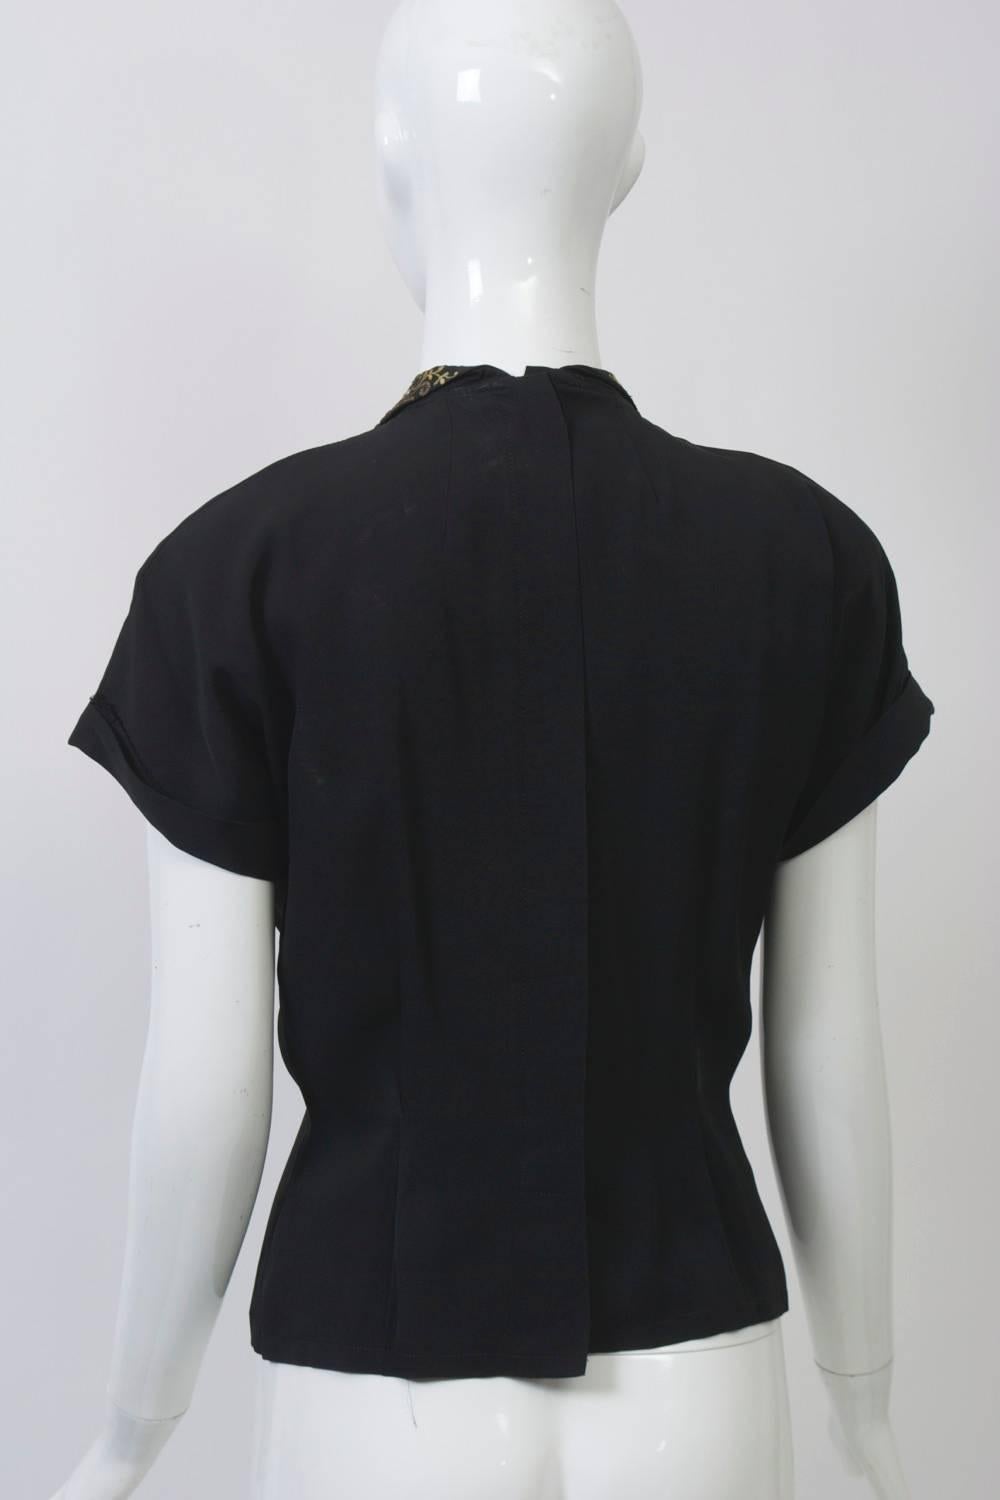 Charming black crepe blouse, late 1940s-early 1950s, featuring an embroidered and pearl-decorated collar, short sleeves with turned-back cuffs, and hidden buttons down the back. Double darts nip in the waist.  Size S-M.